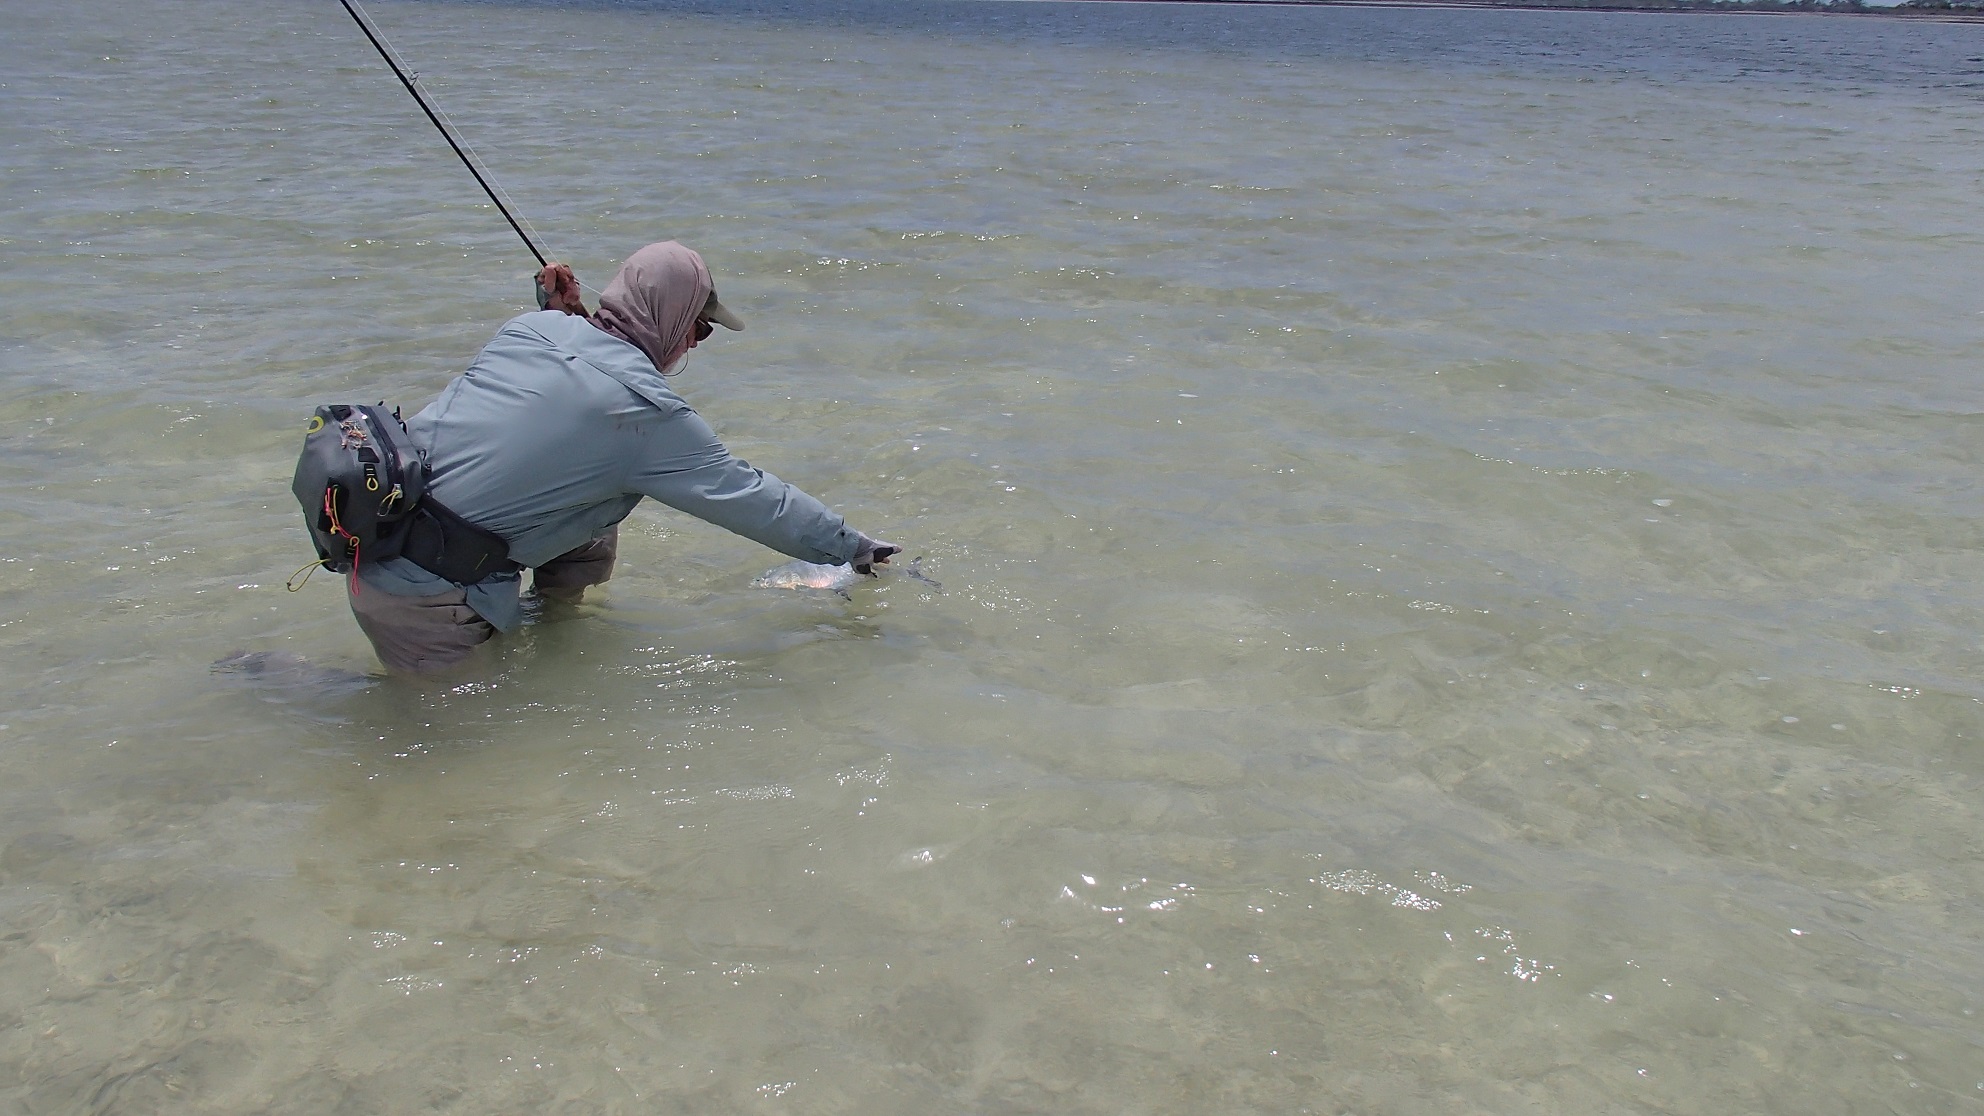 Catching a stripped Trevally